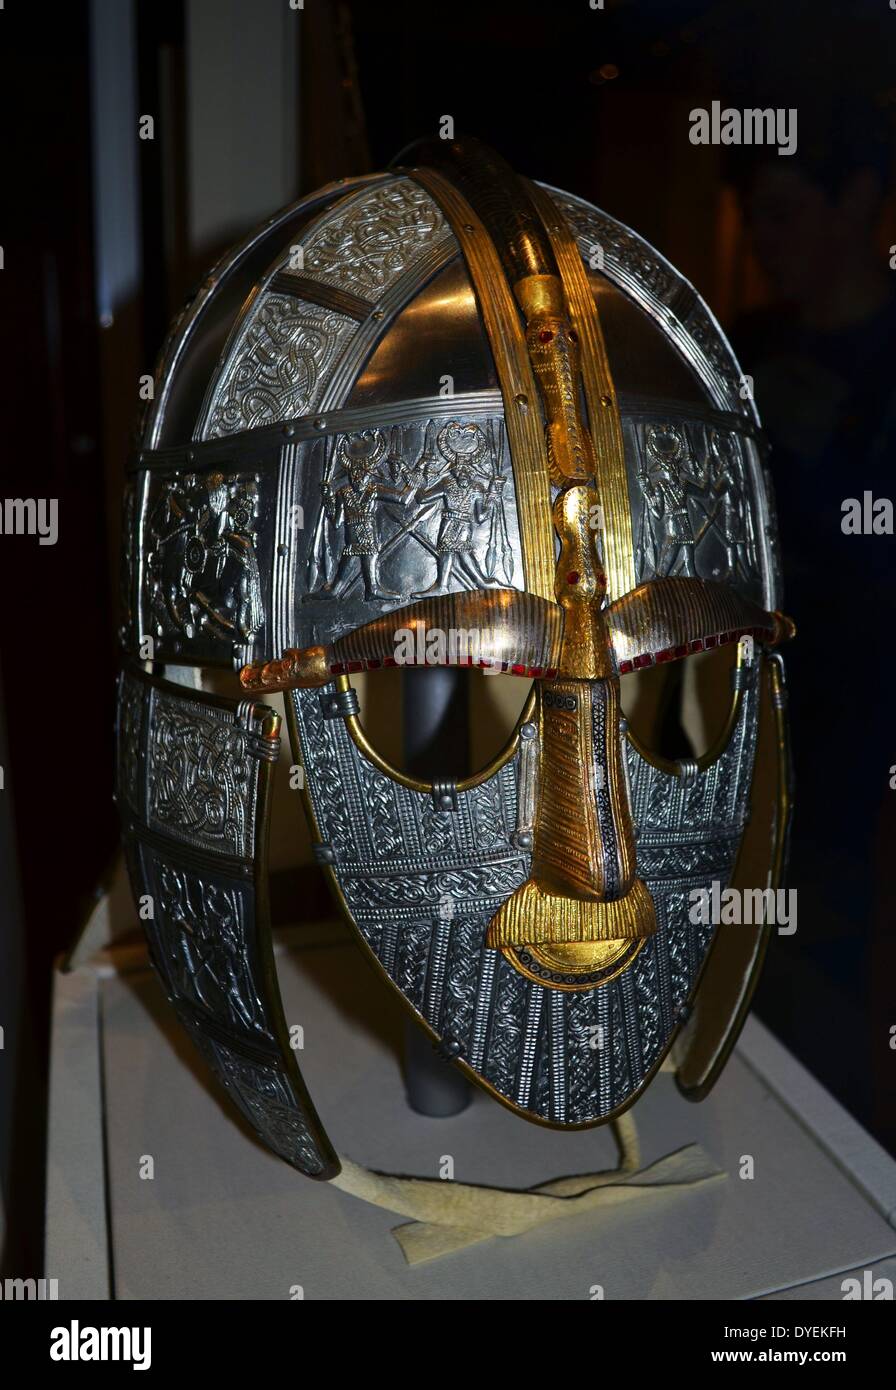 Replica of Sutton Hoo; ship-burial helmet 7th Century. The panels are decorated with interlacing Germanic Style II animal ornament and heroic scenes and motifs. Stock Photo